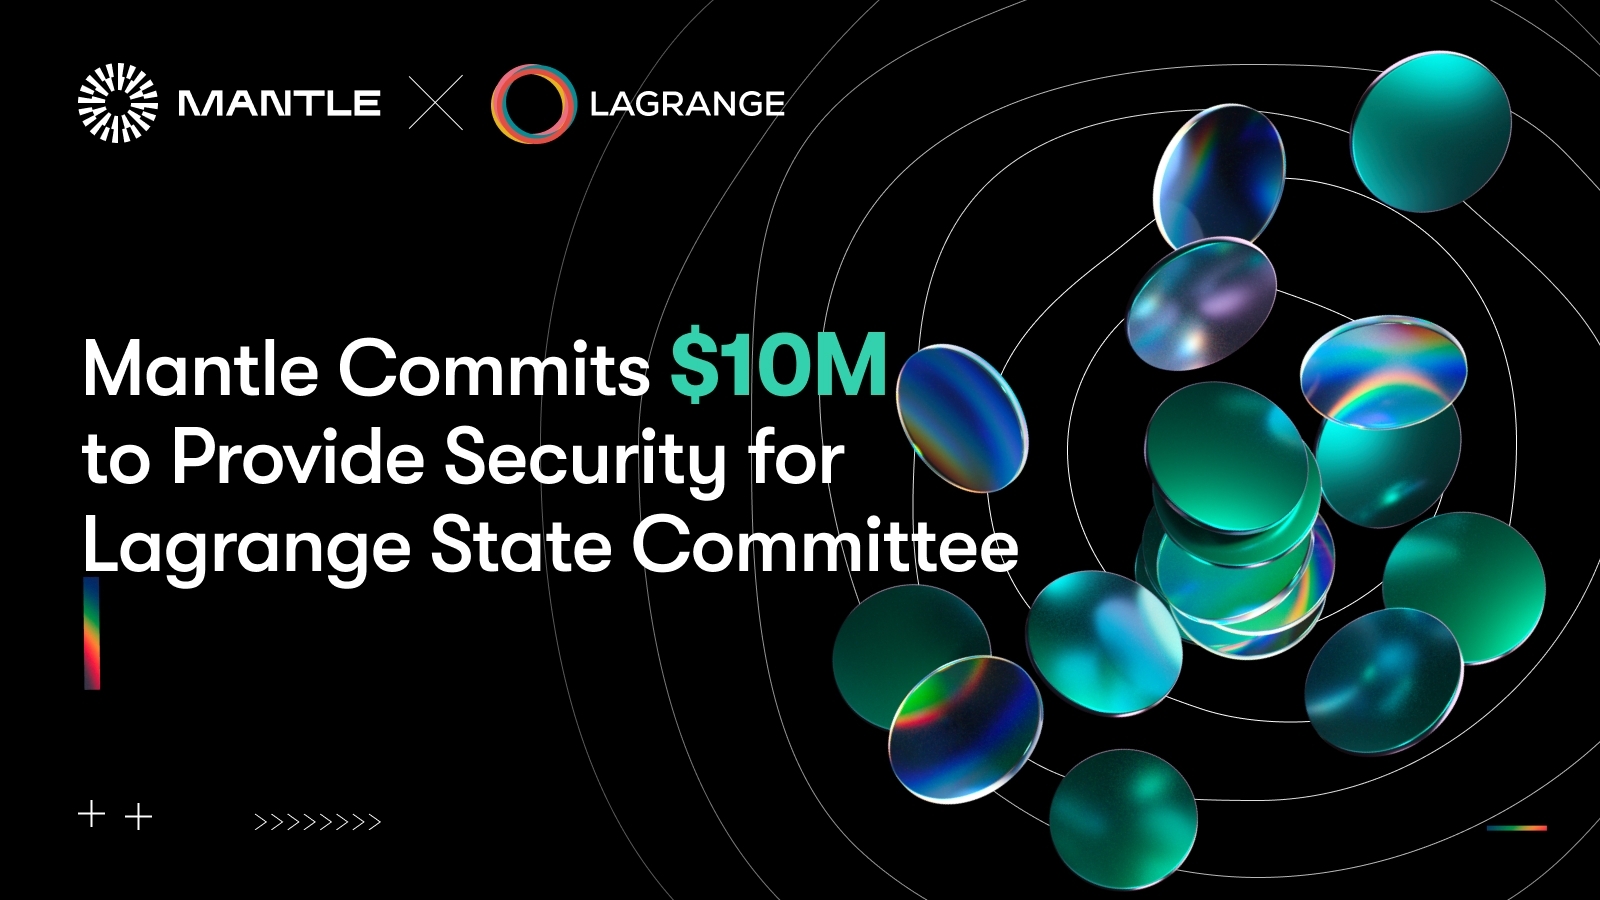 Mantle Commits $10M to Provide Security for Lagrange State Committee